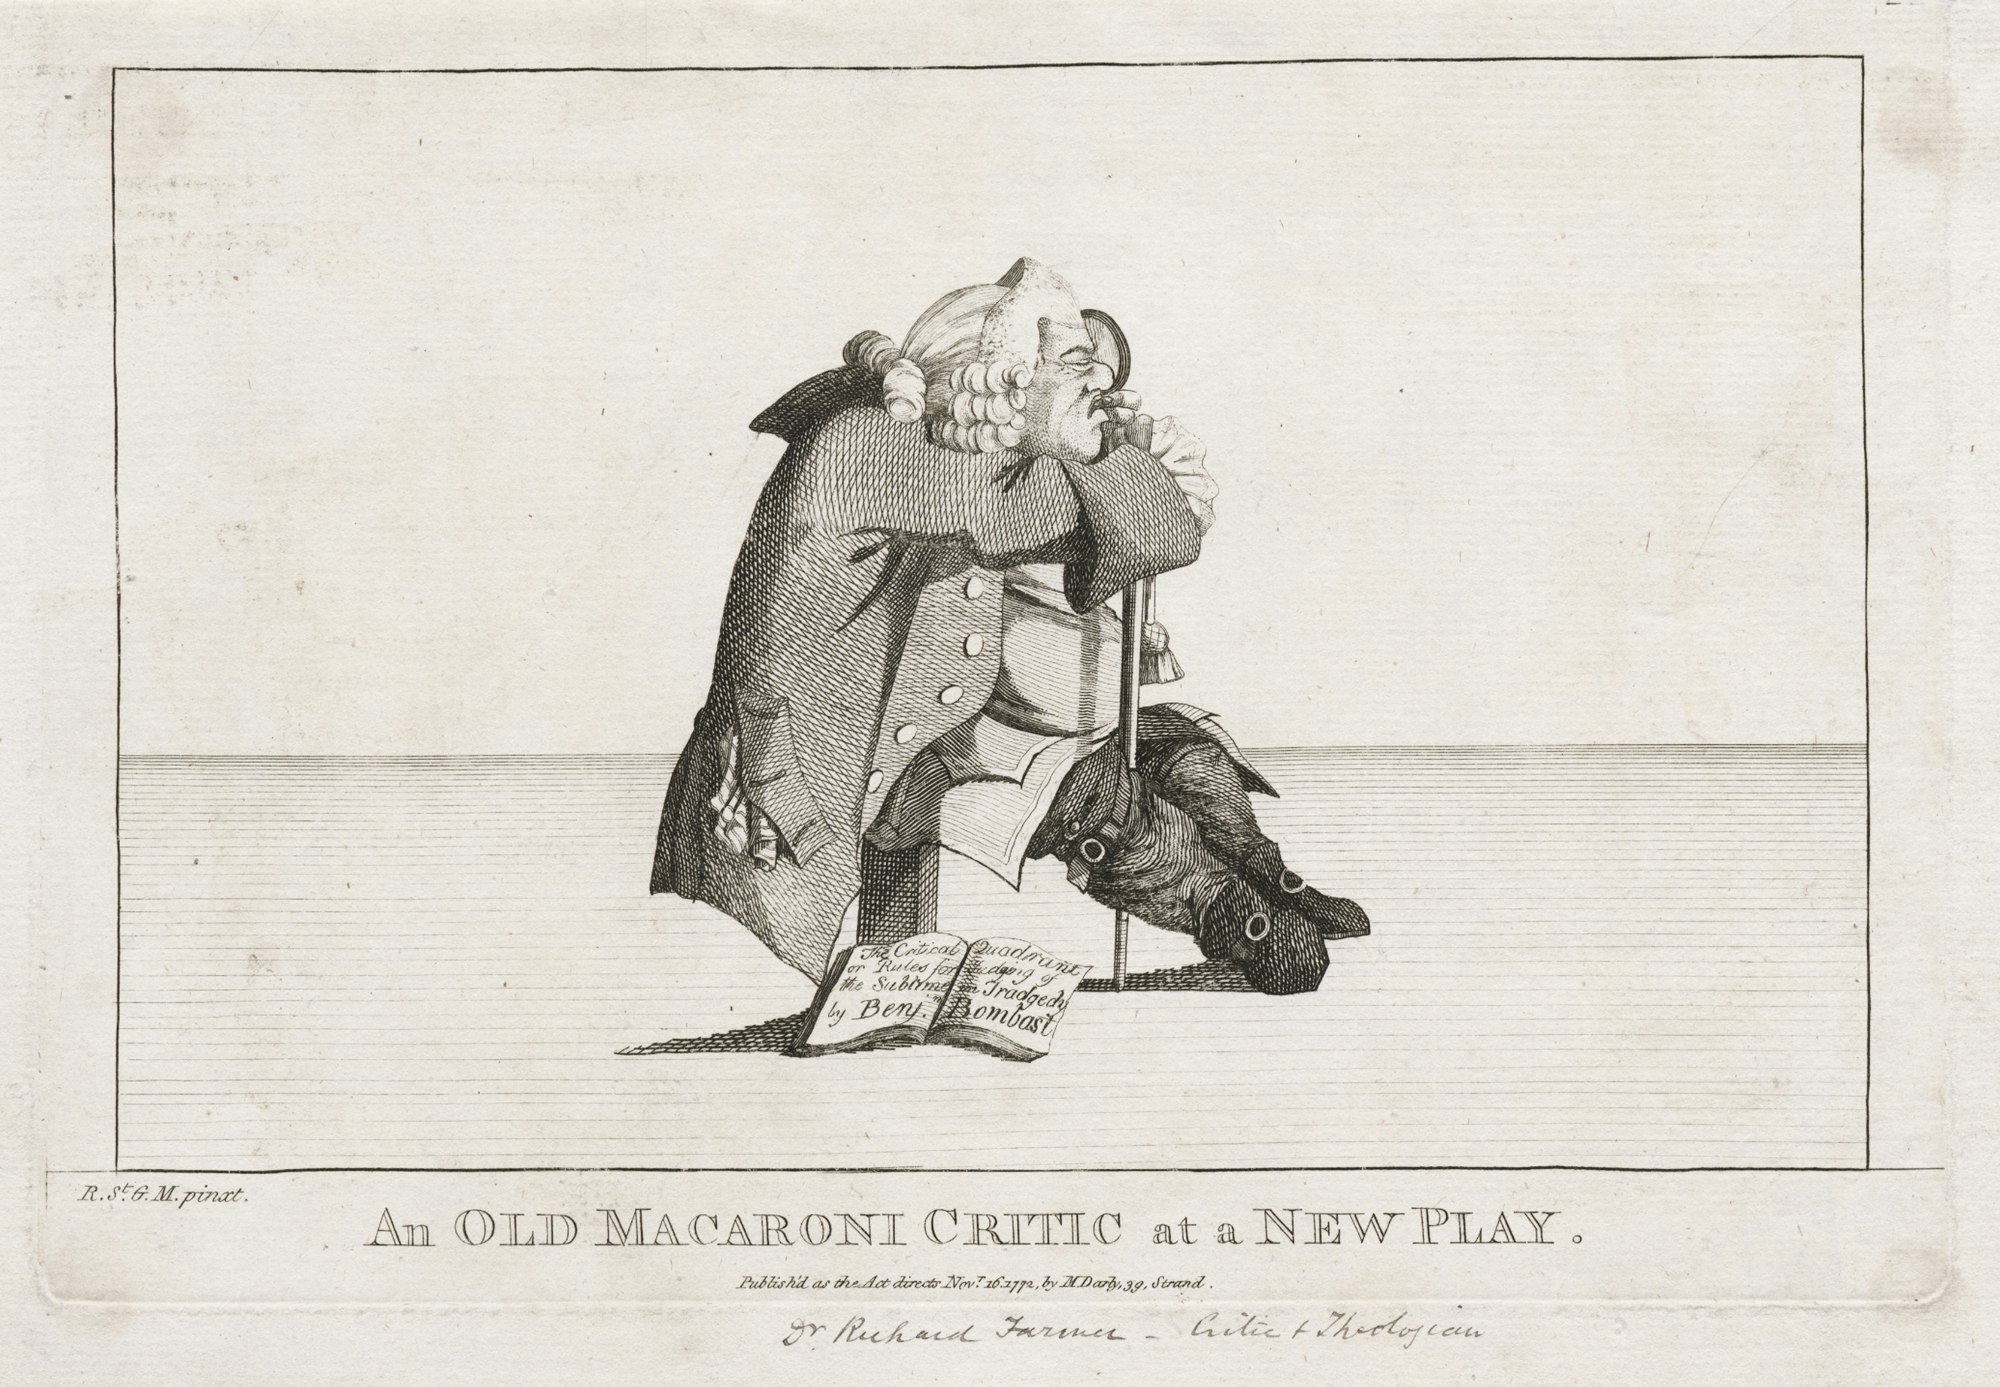 An Old Macaroni Critic at a New Play